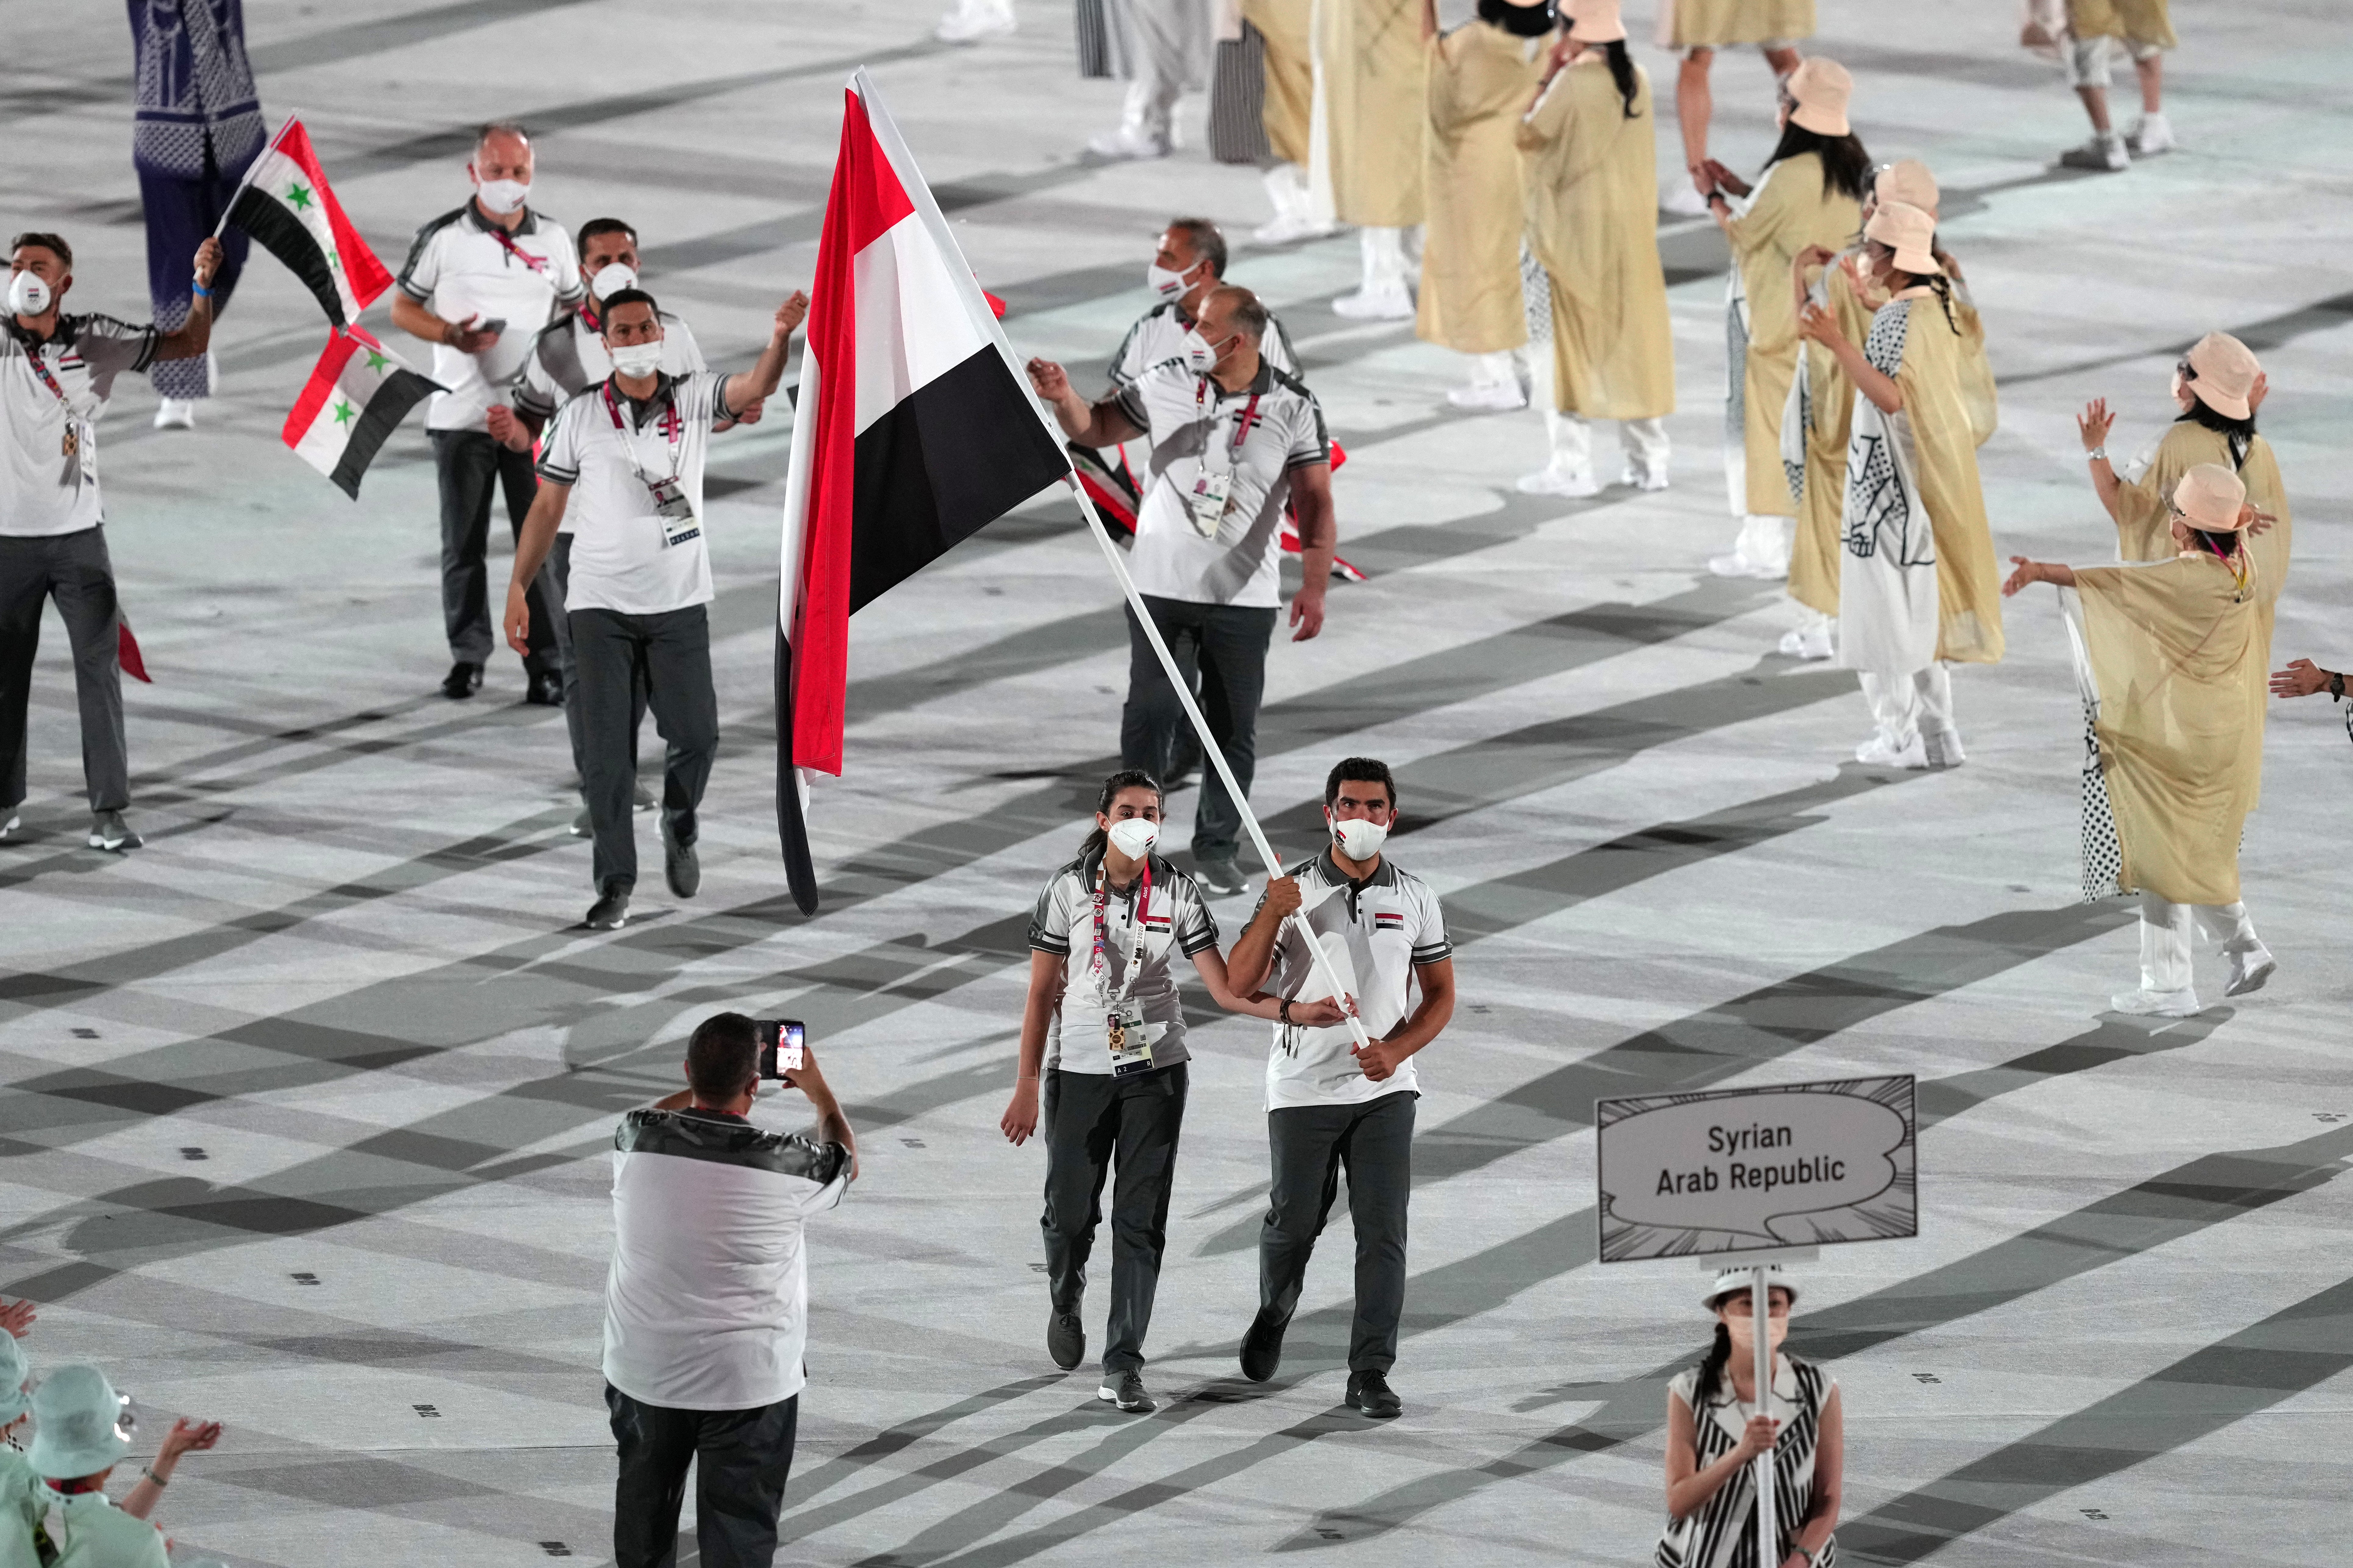 Twelve-year-old Hend Zaza helped carry the Syrian flag into the Olympic Stadium (Martin Rickett/PA)